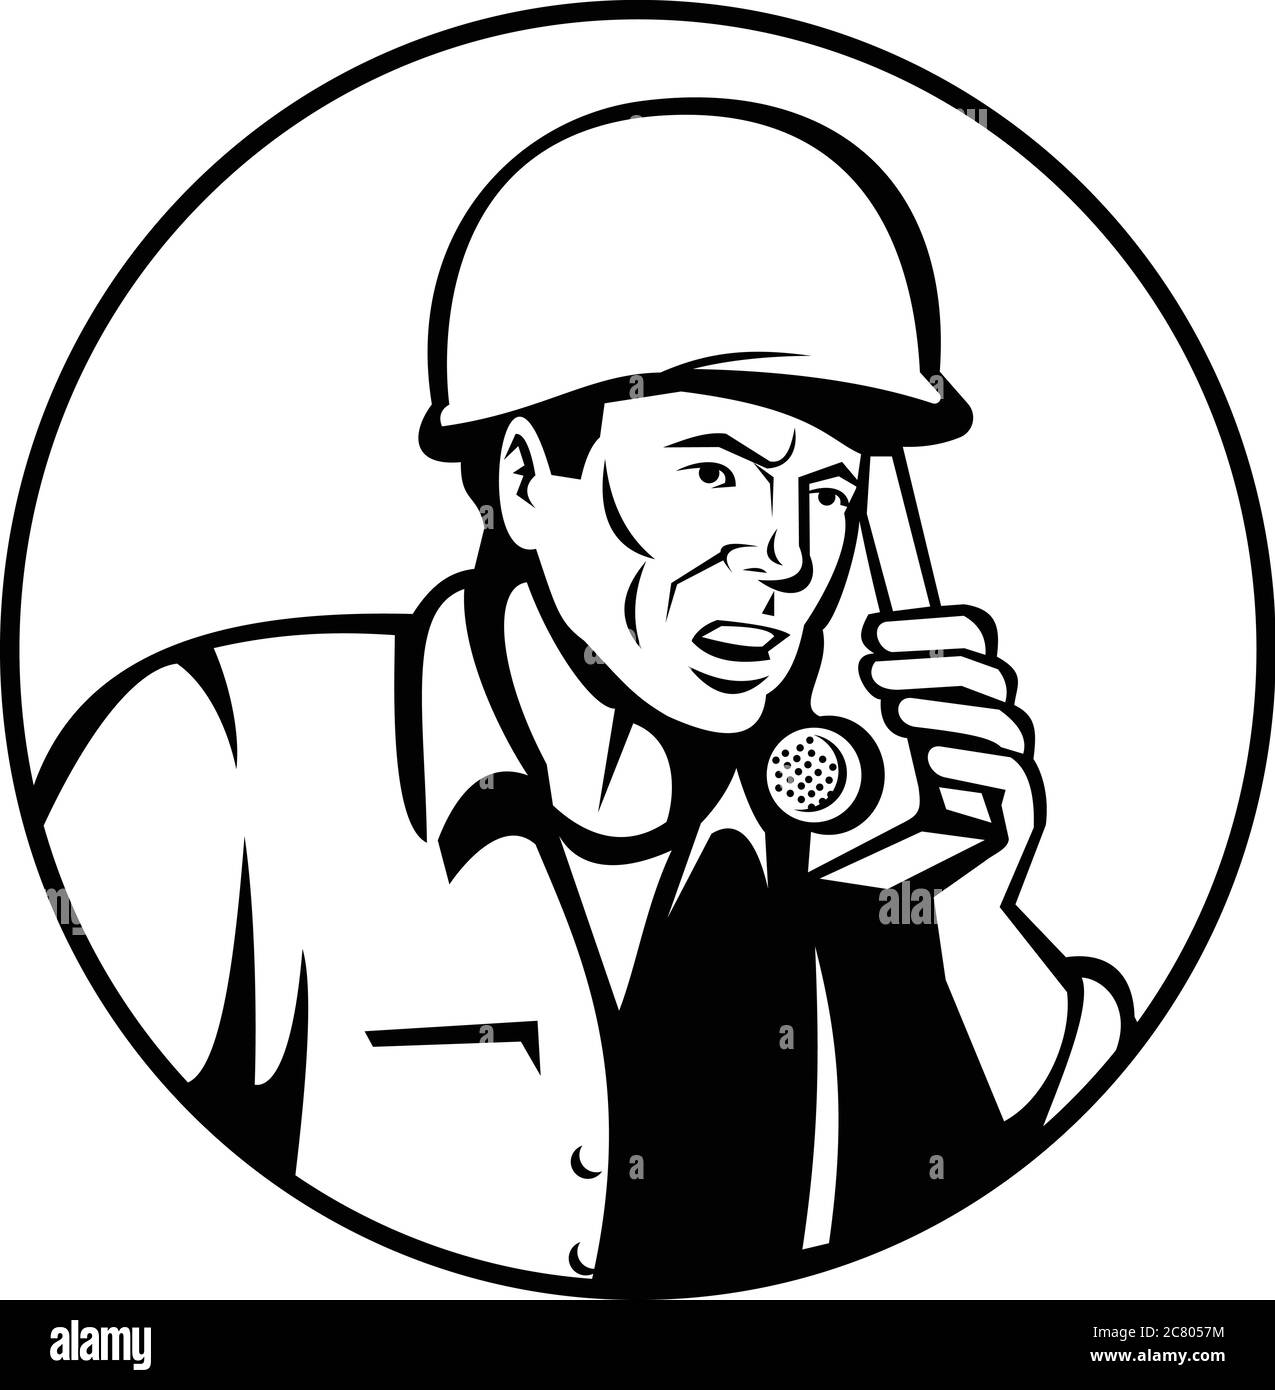 Black and white illustration of a World War two American soldier serviceman talking and calling walkie-talkie radio communication set inside circle on Stock Vector